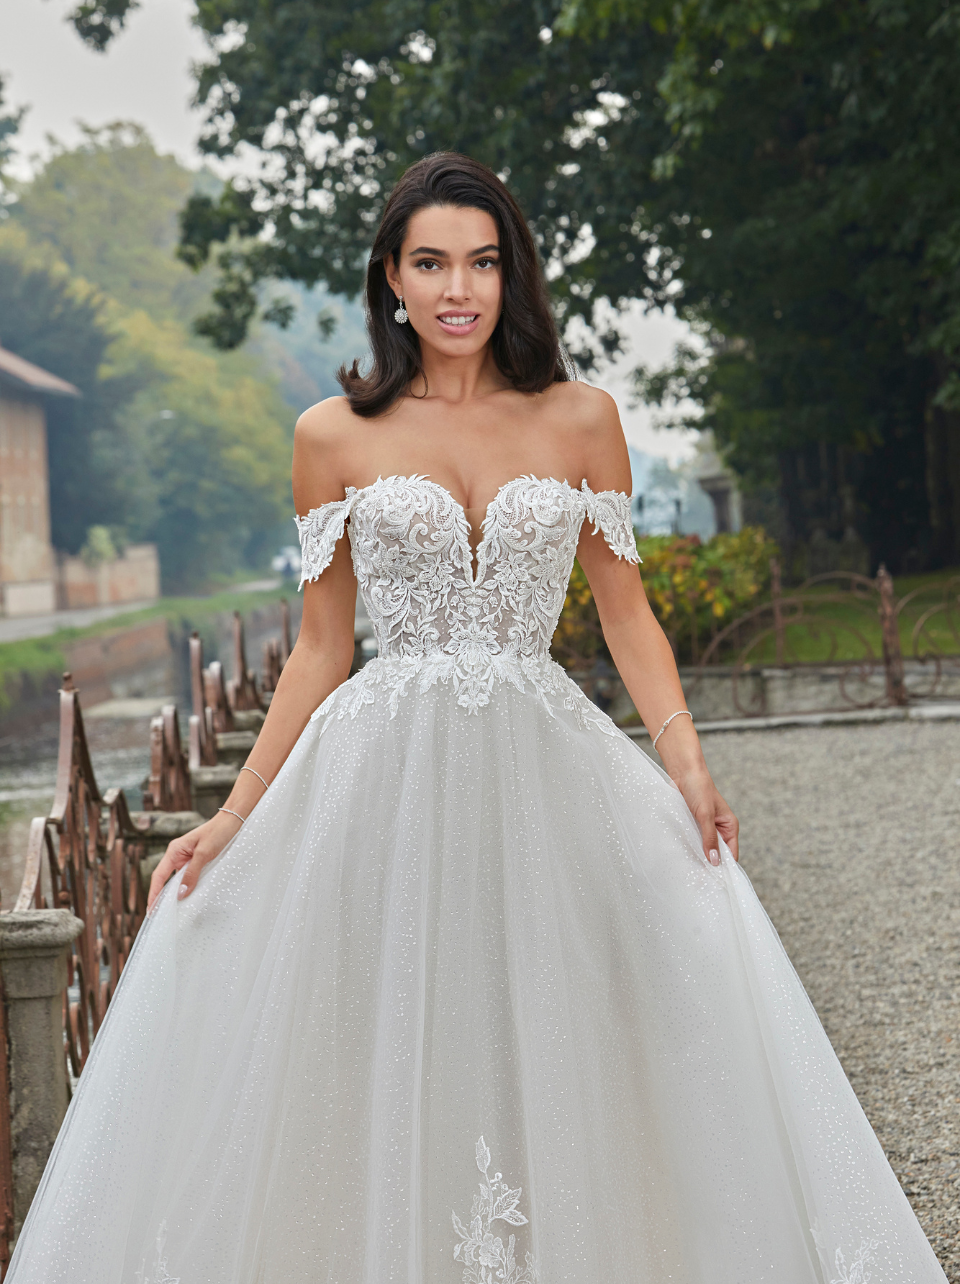 Sleeved Wedding Gowns